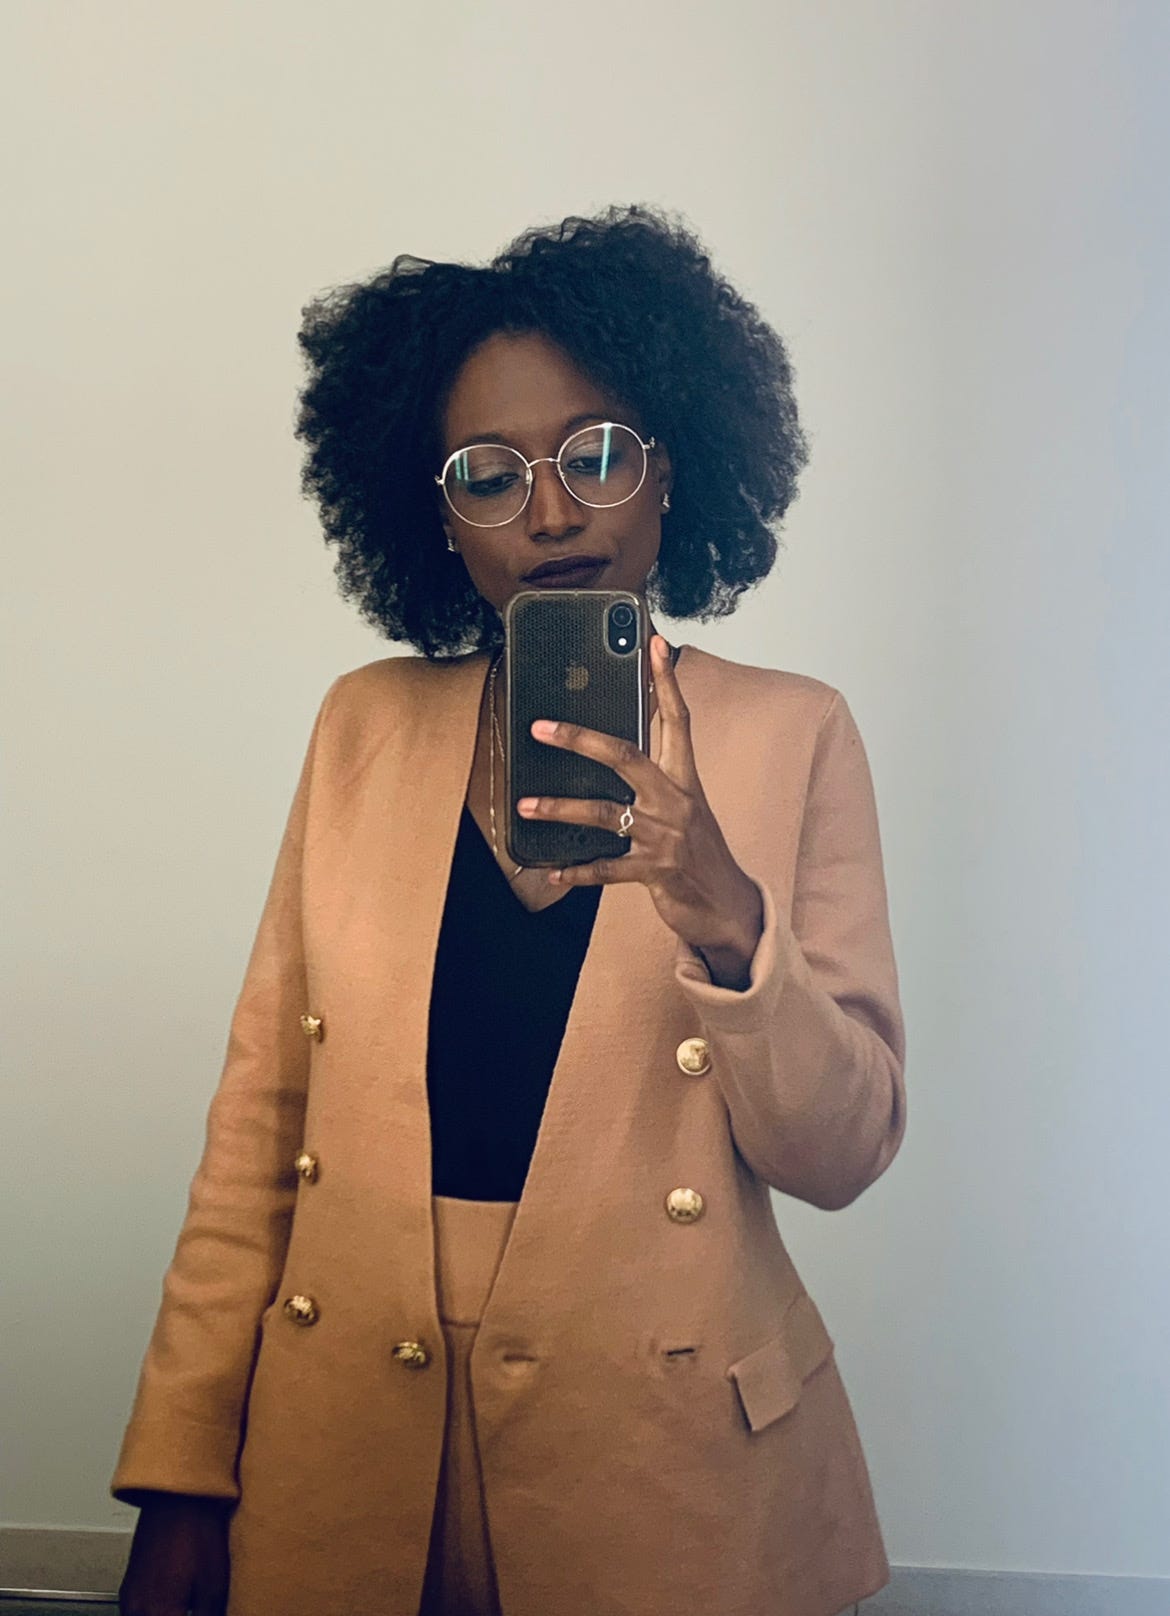 A Black woman taking a picture of herself with an Apple iPhone. She has curly hair and she wears round gold glasses frames, a gold chain necklace, a tan jacket with gold buttons, a black shirt, and tan pants.